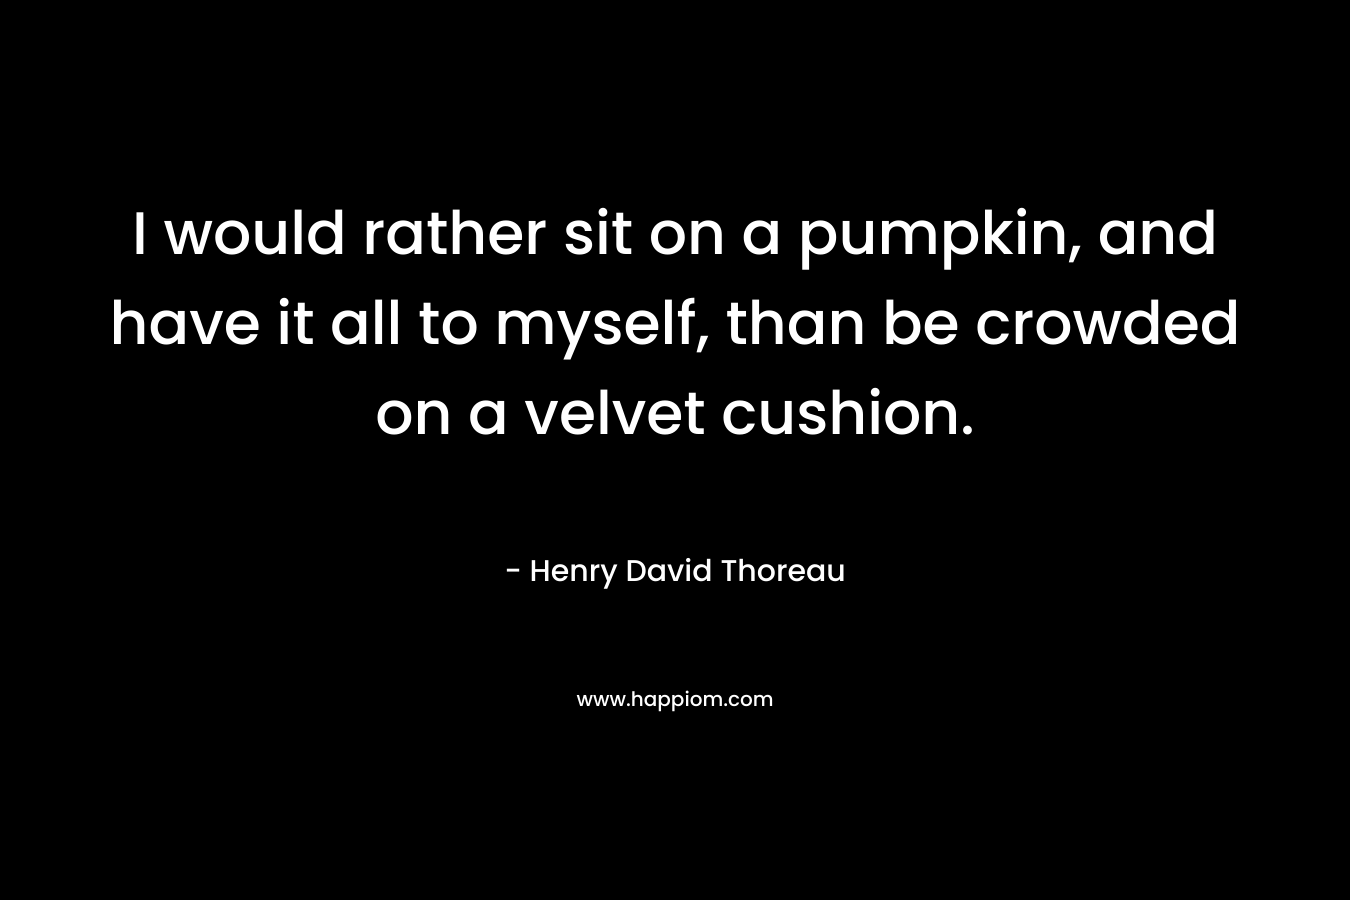 I would rather sit on a pumpkin, and have it all to myself, than be crowded on a velvet cushion. – Henry David Thoreau